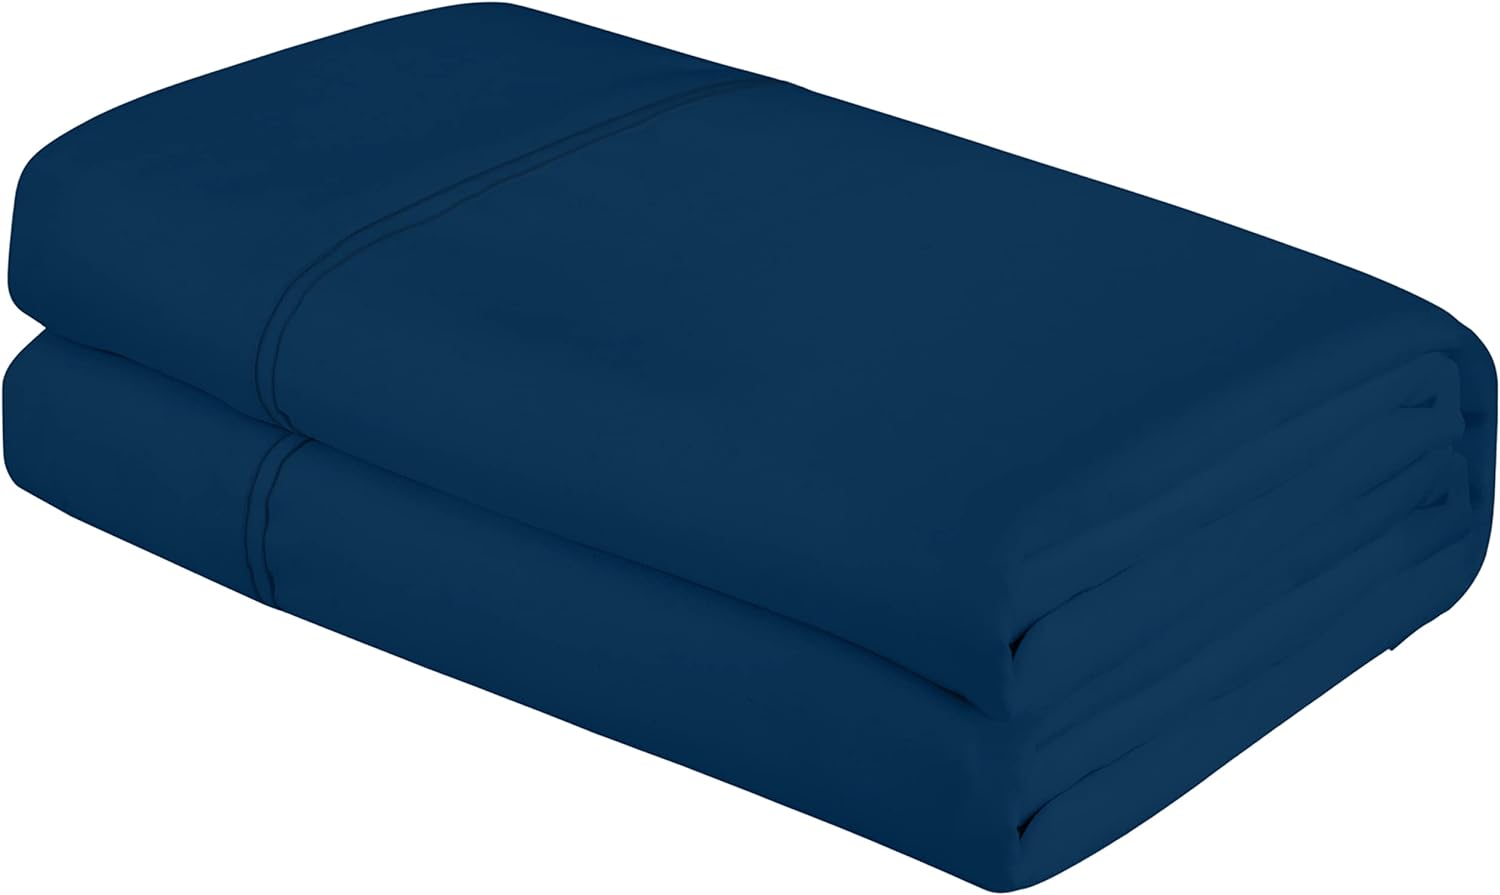 ROYALE LINENS Twin Size Flat Sheet Only - Brushed 1800 Microfiber - Ultra Soft & Breathable - Wrinkle & Stain Resistant - Hotel Quality Flat Sheet Sold Separately - Top Sheet for Bed - (Twin, Navy)